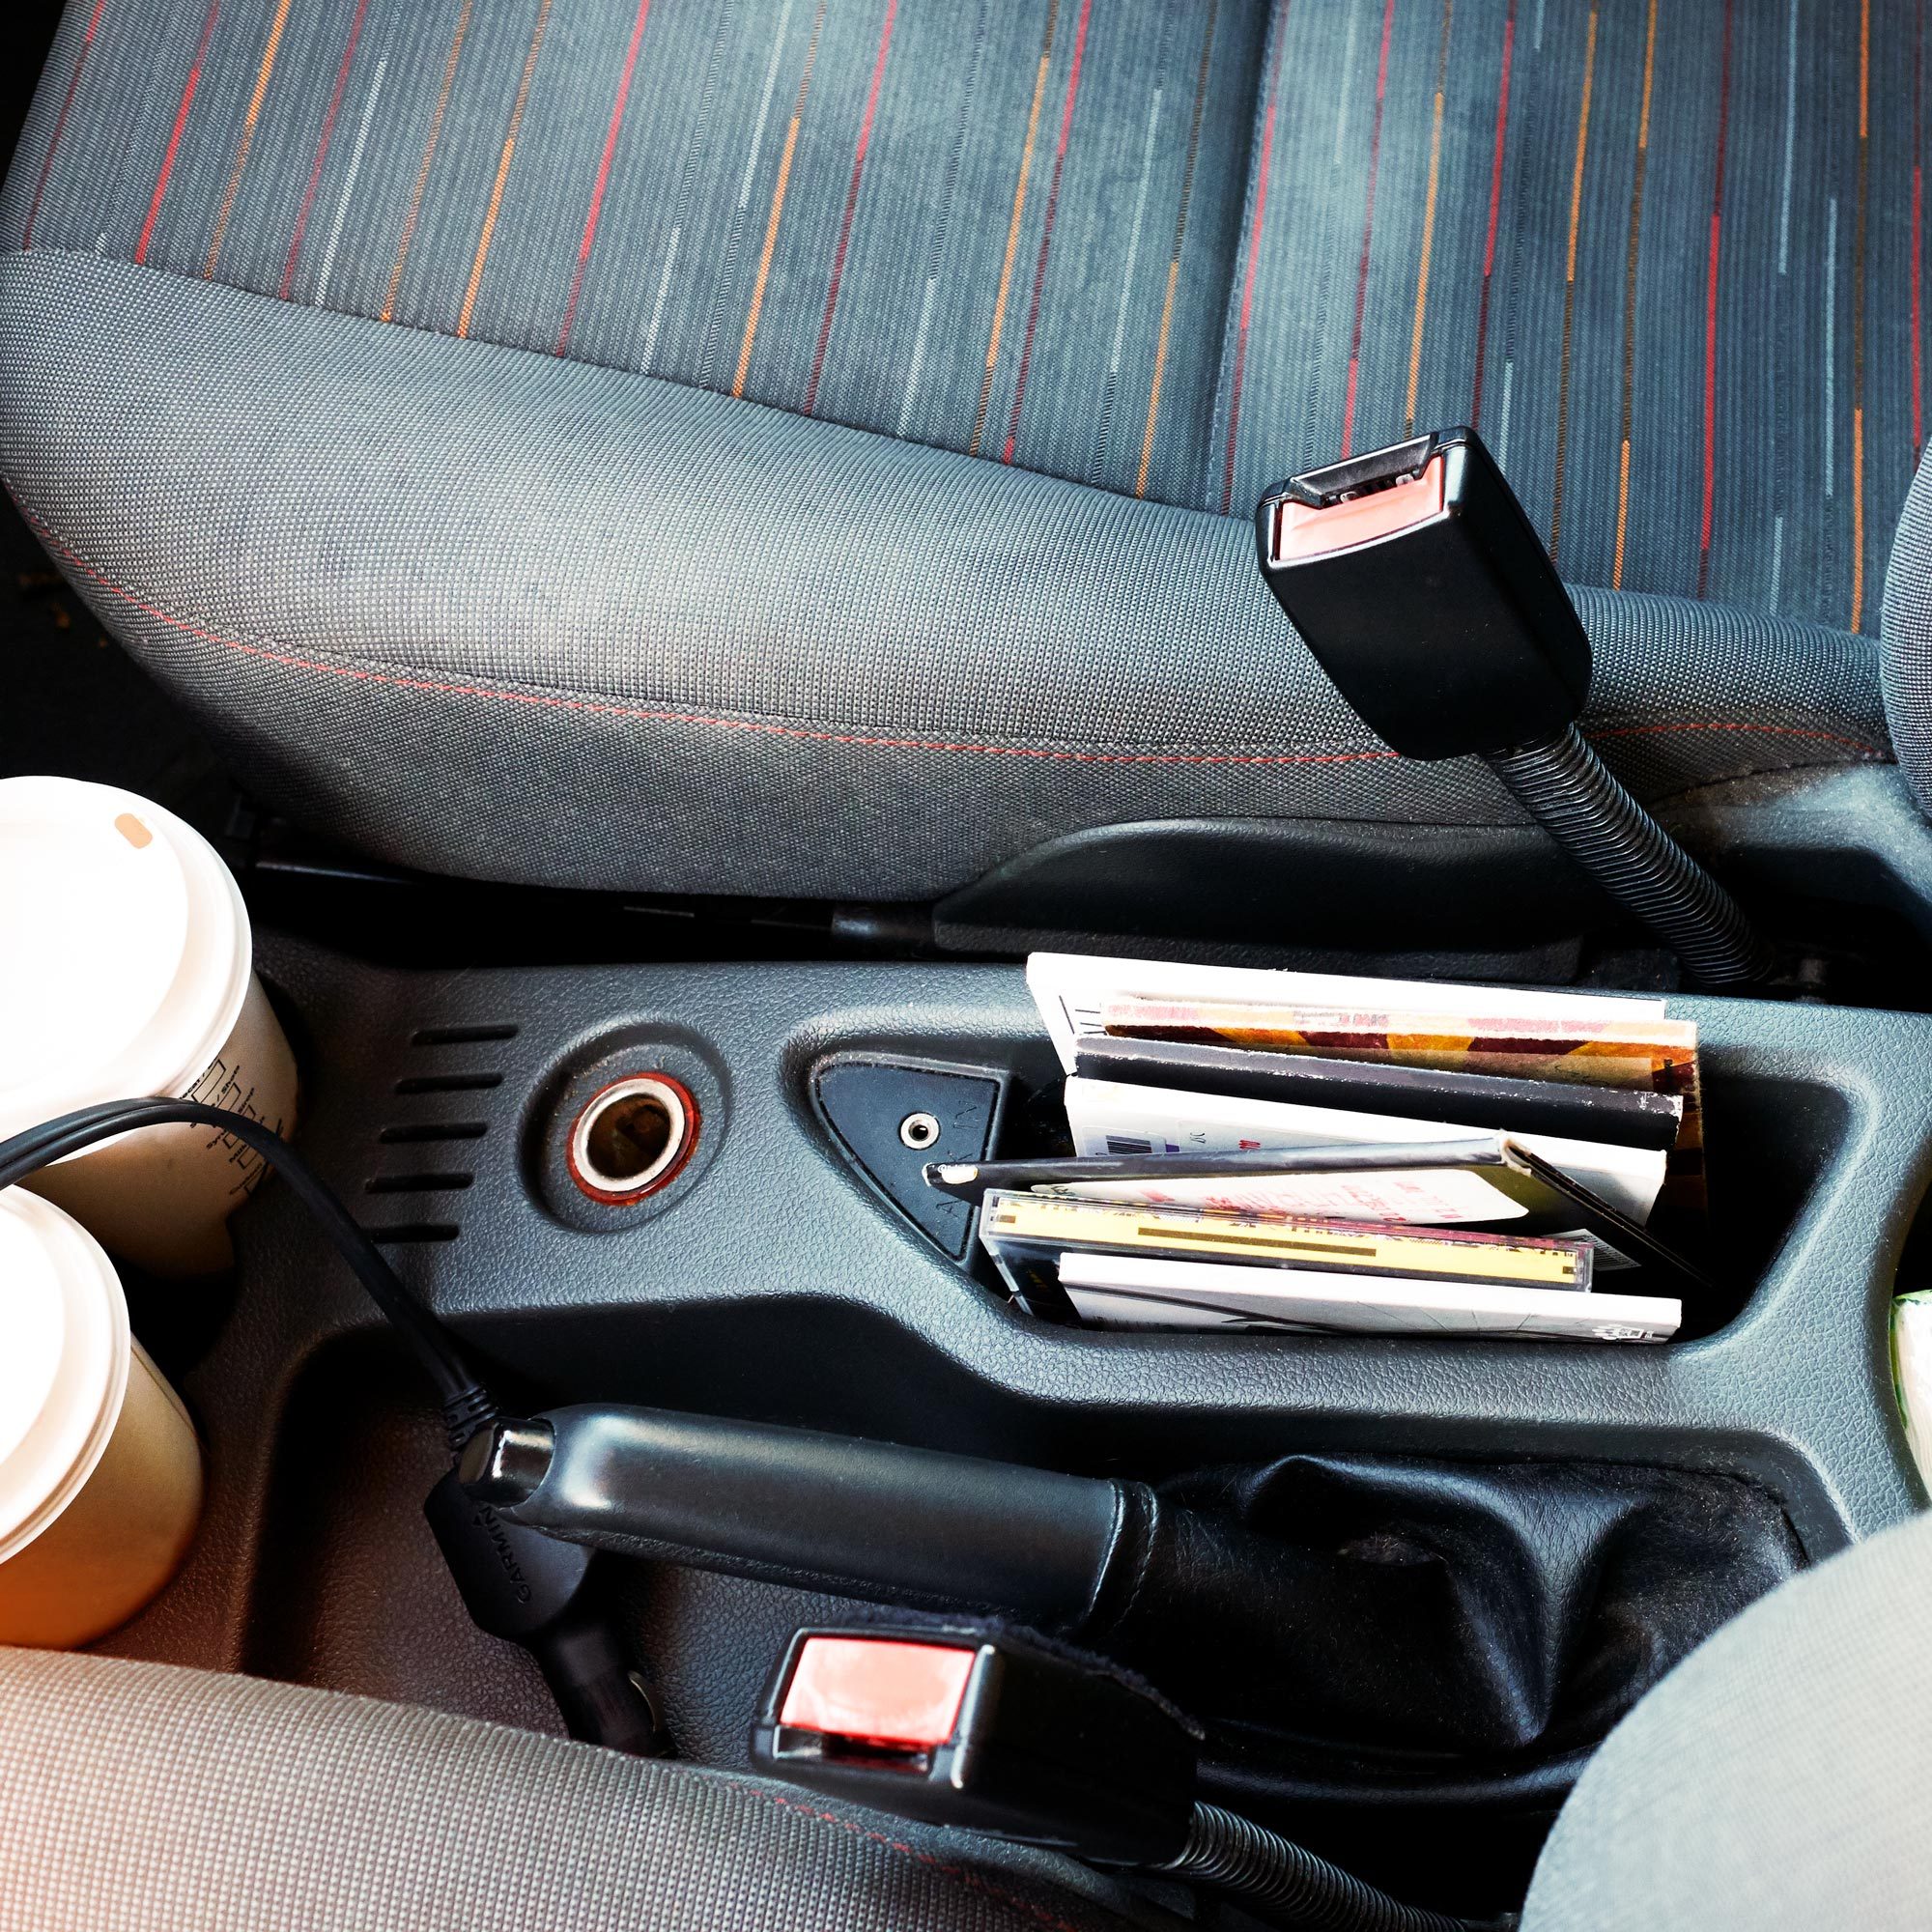 How to Clean a Car Interior: Top 10 Car Interior Cleaning Tips